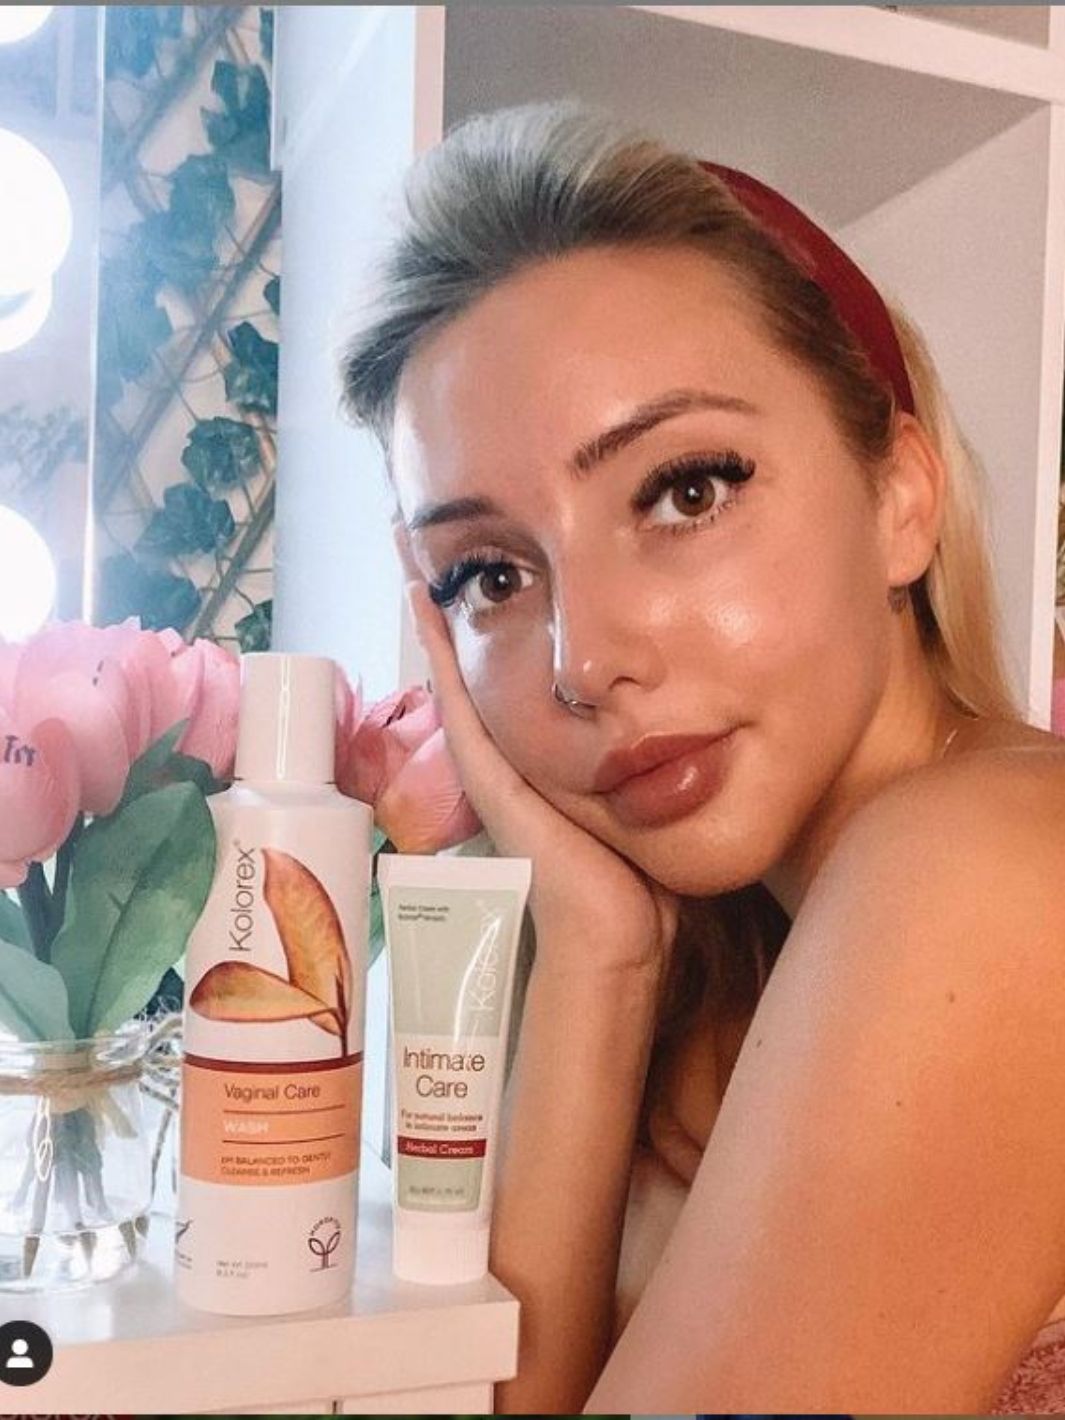 Influencer referencing Kolorex vaginal care products